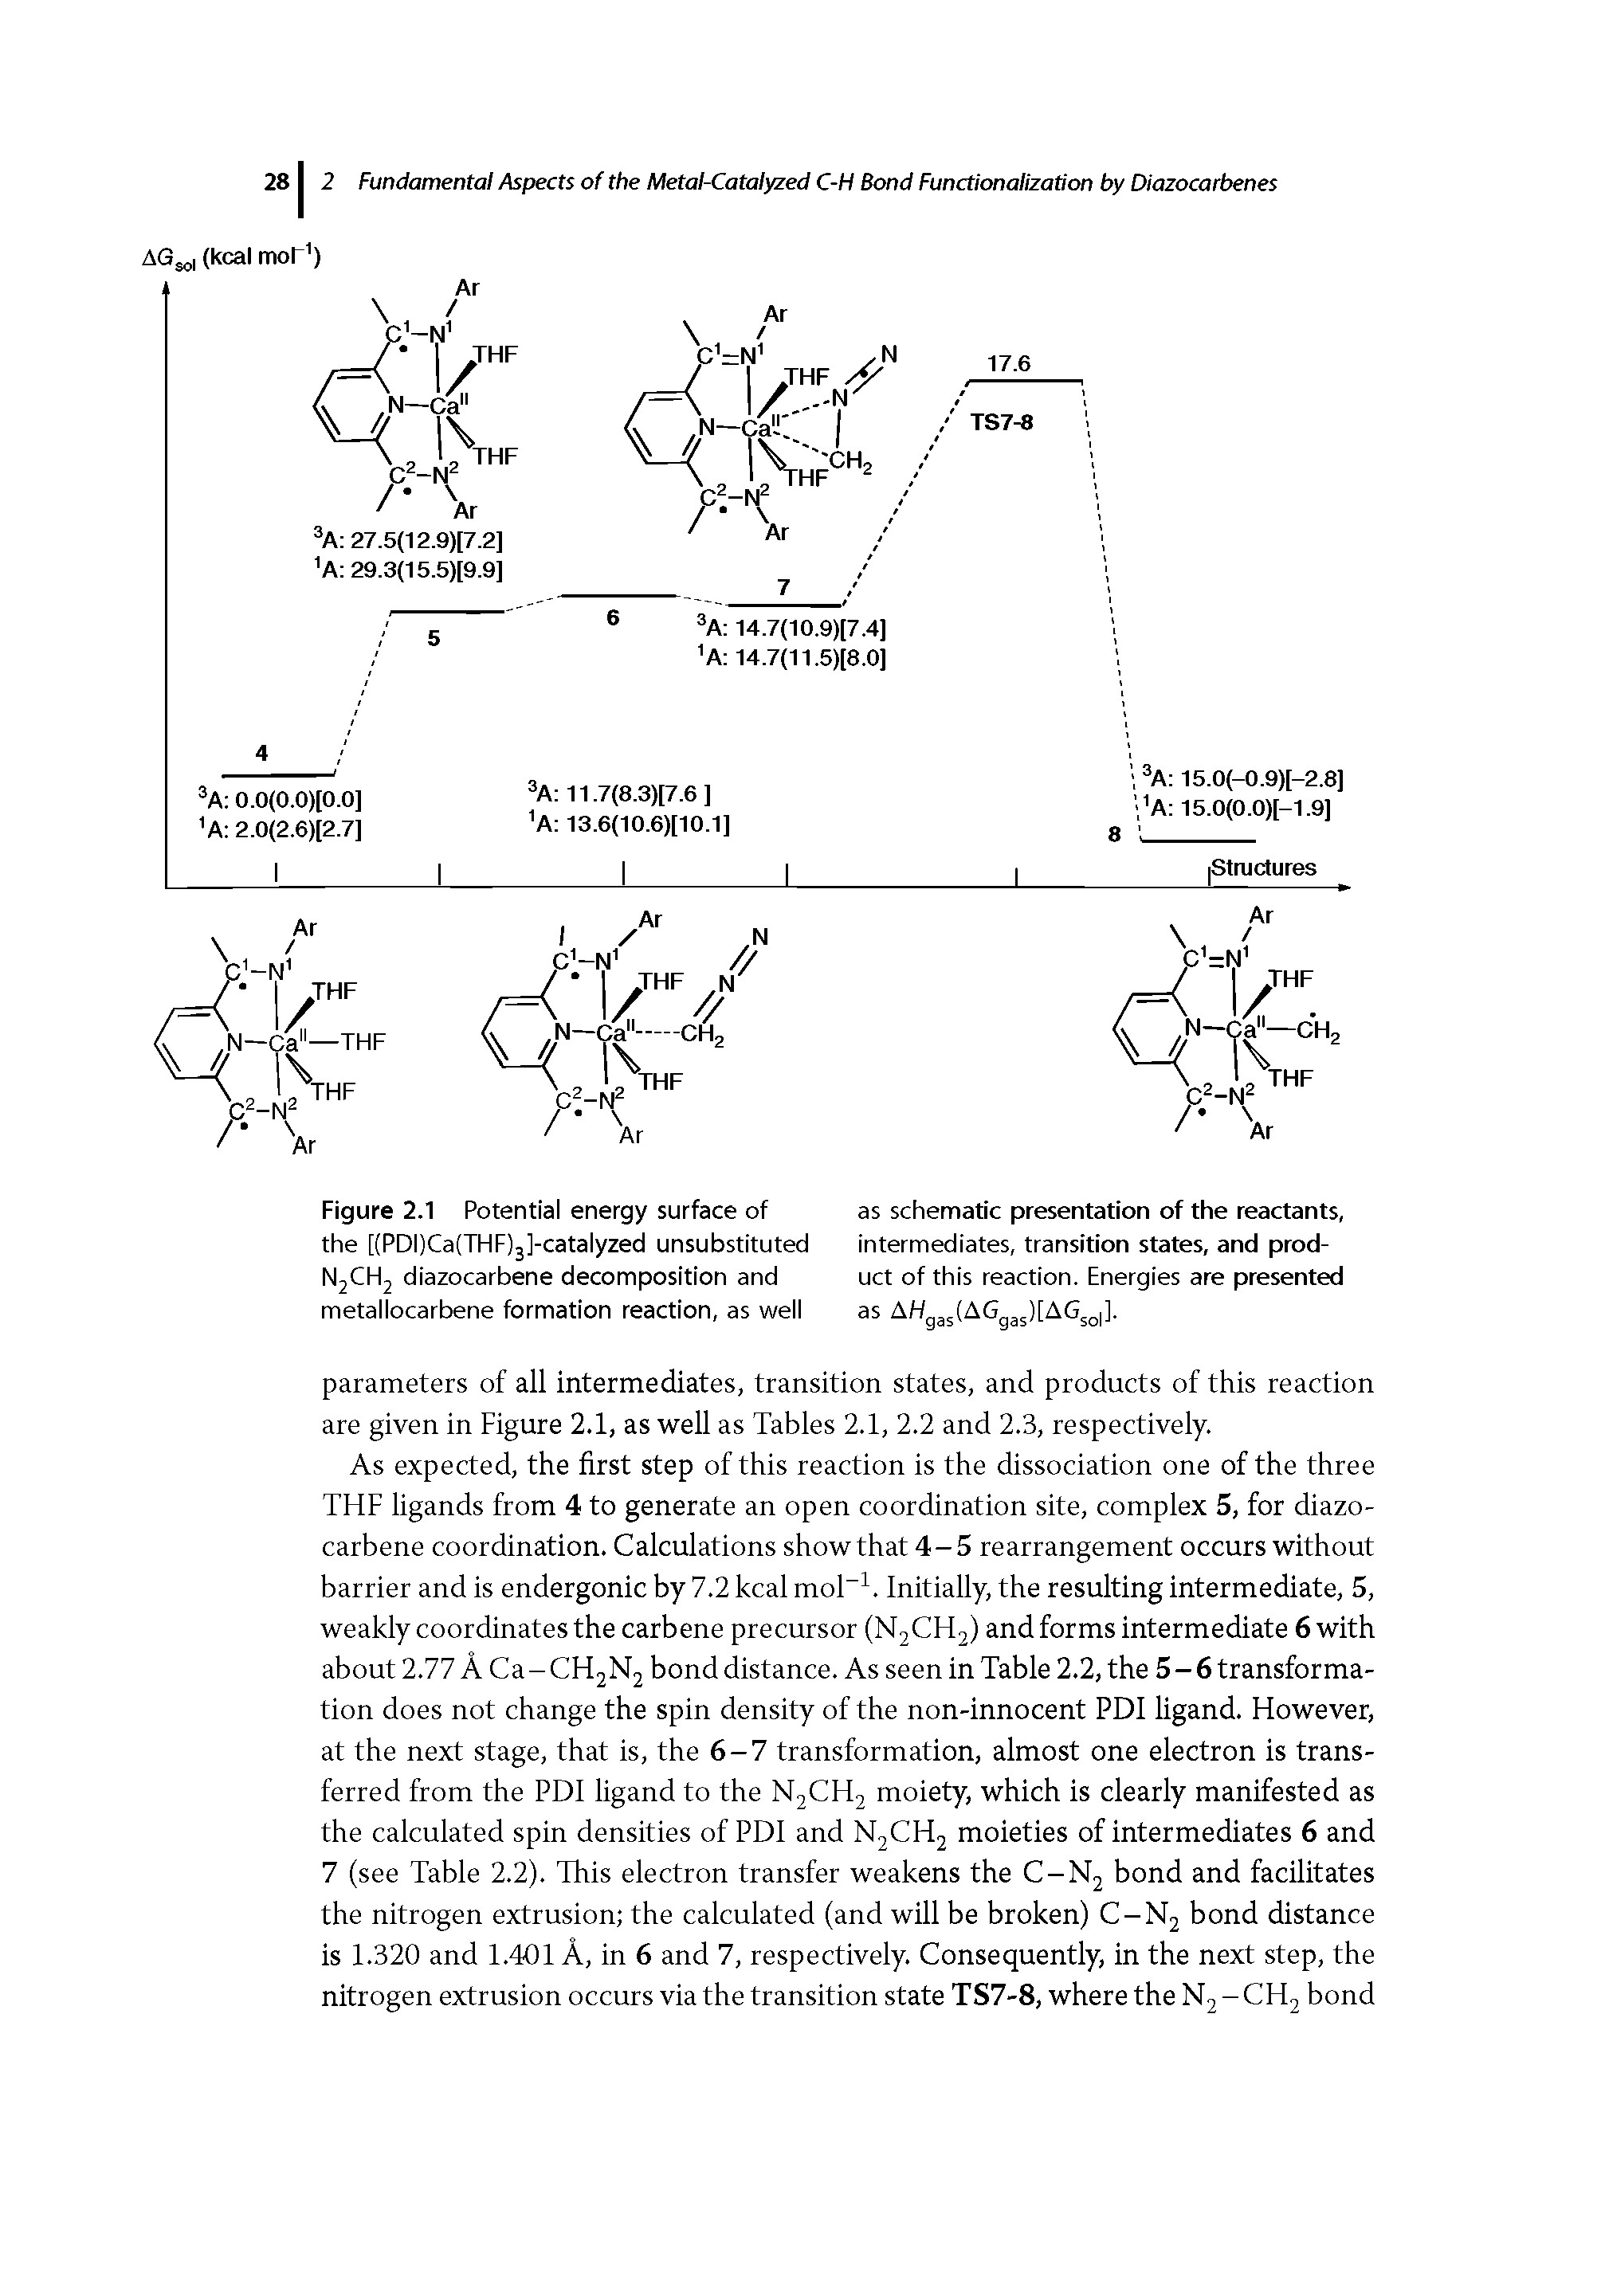 Figure 2.1 Potential energy surface of the [(PDI)Ca(THF)3]-catalyzed unsubstituted NjCHj diazocarbene decomposition and metallocarbene formation reaction, as well...